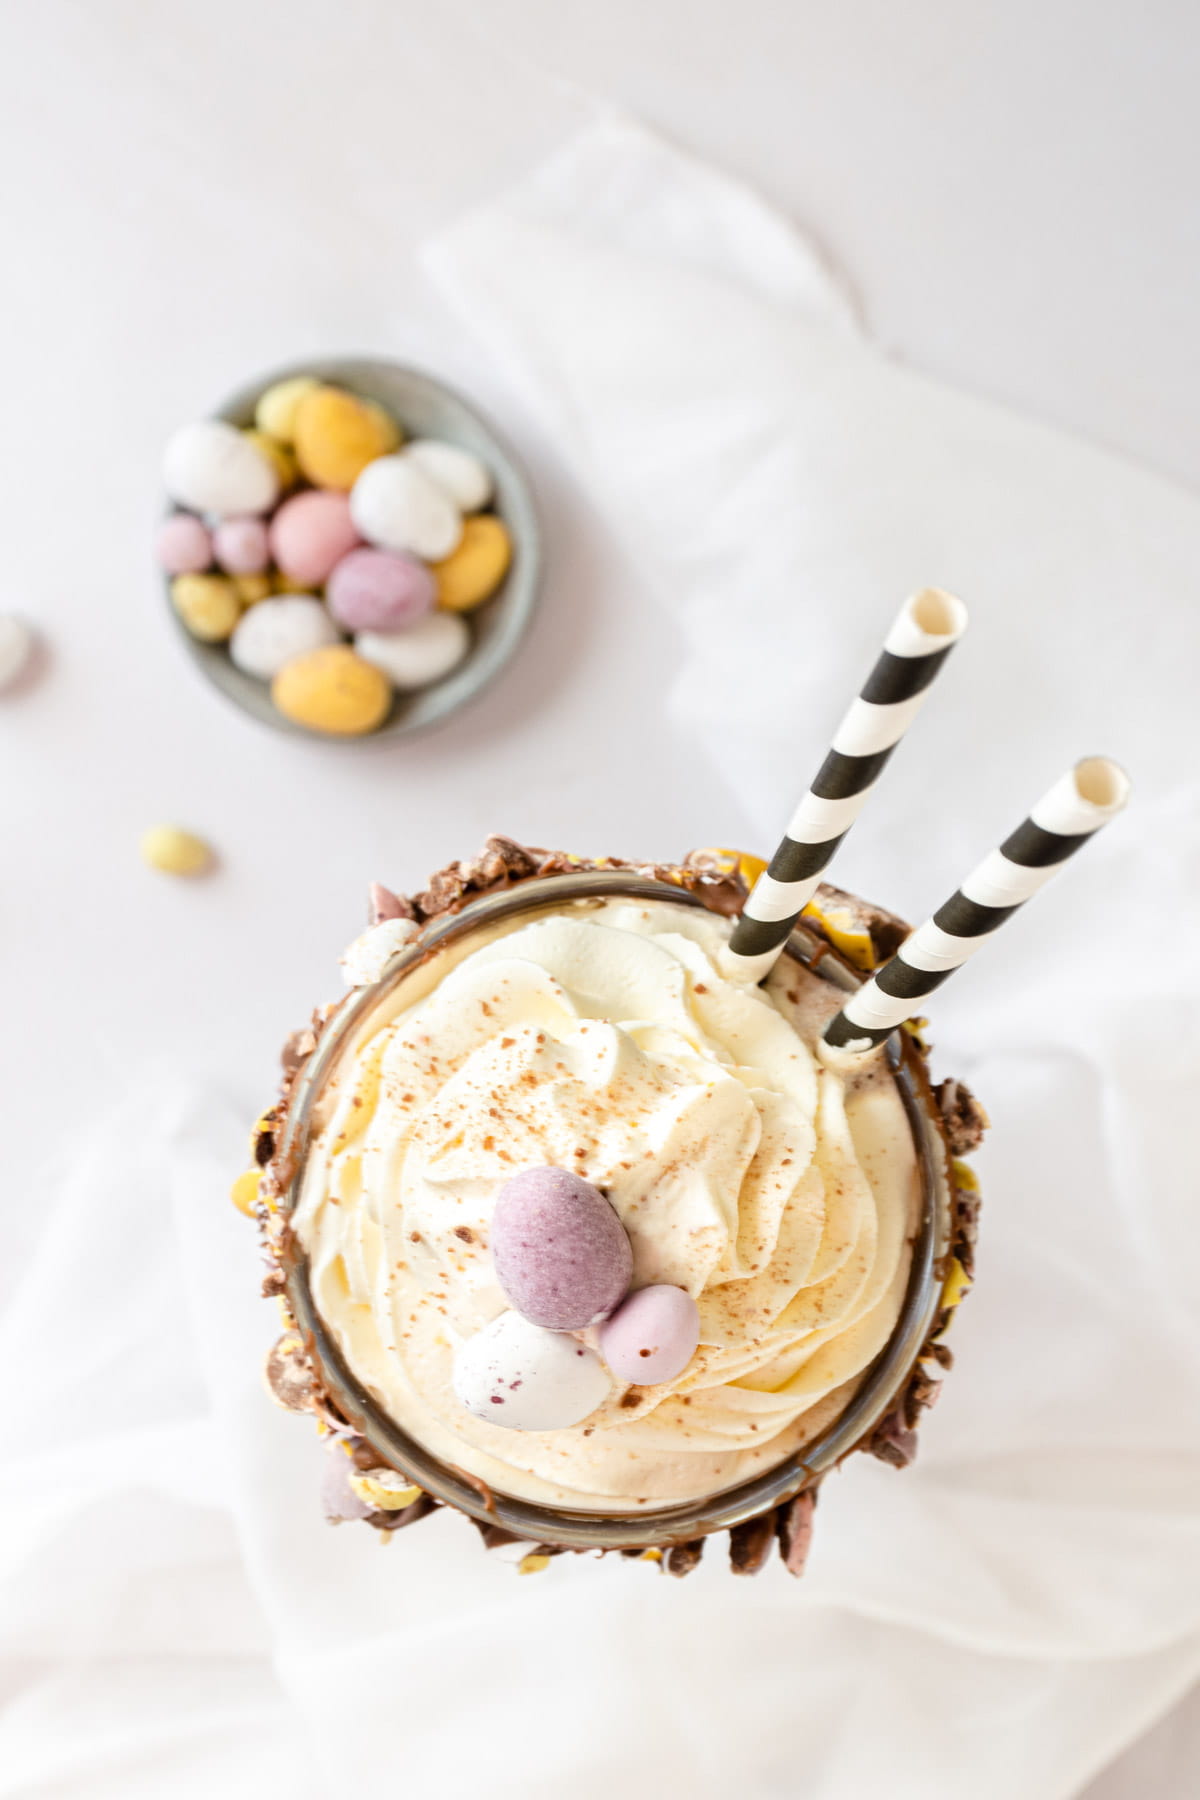 Top down shot of vanilla milkshake with black and white striped straws and Easter chocolate eggs